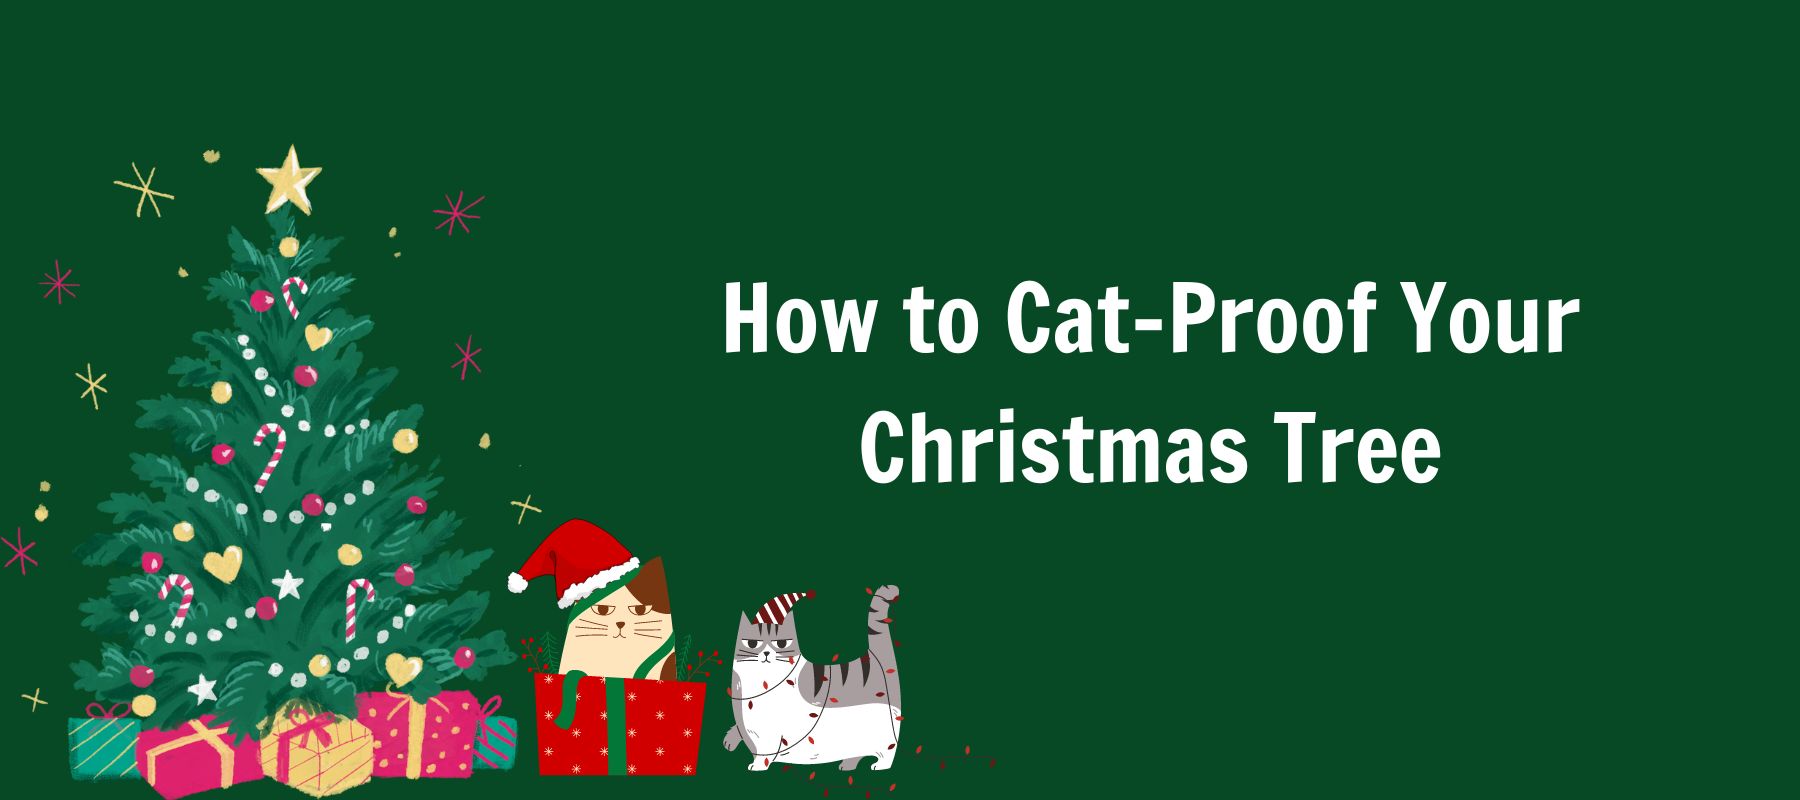 How-to-catproof-your-Christmas-tree